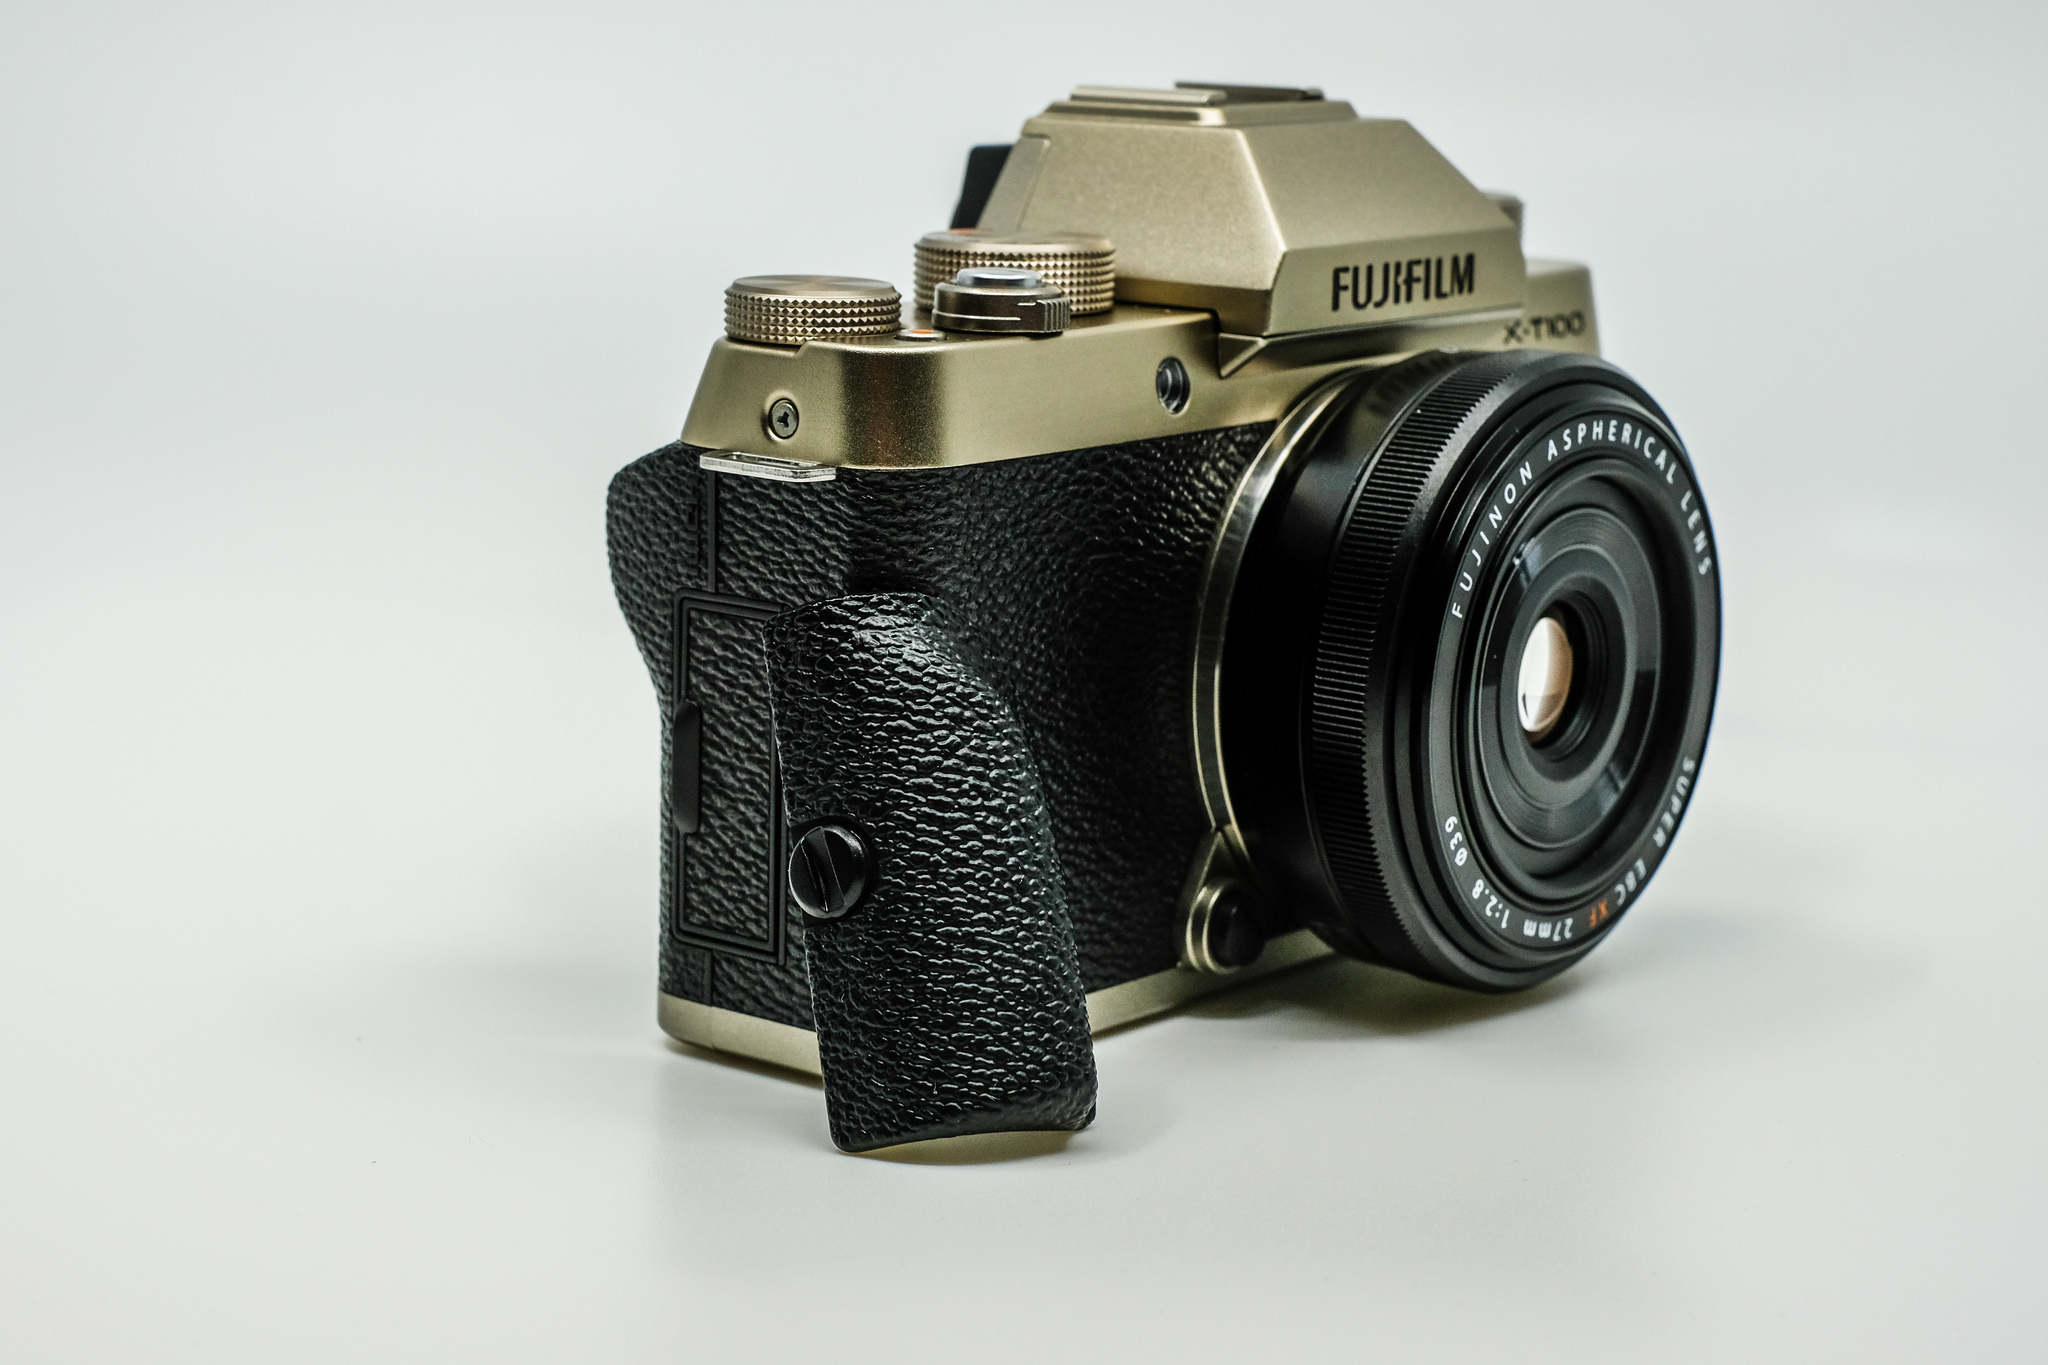 One of the most informative review of the Fujifilm X-T100: The